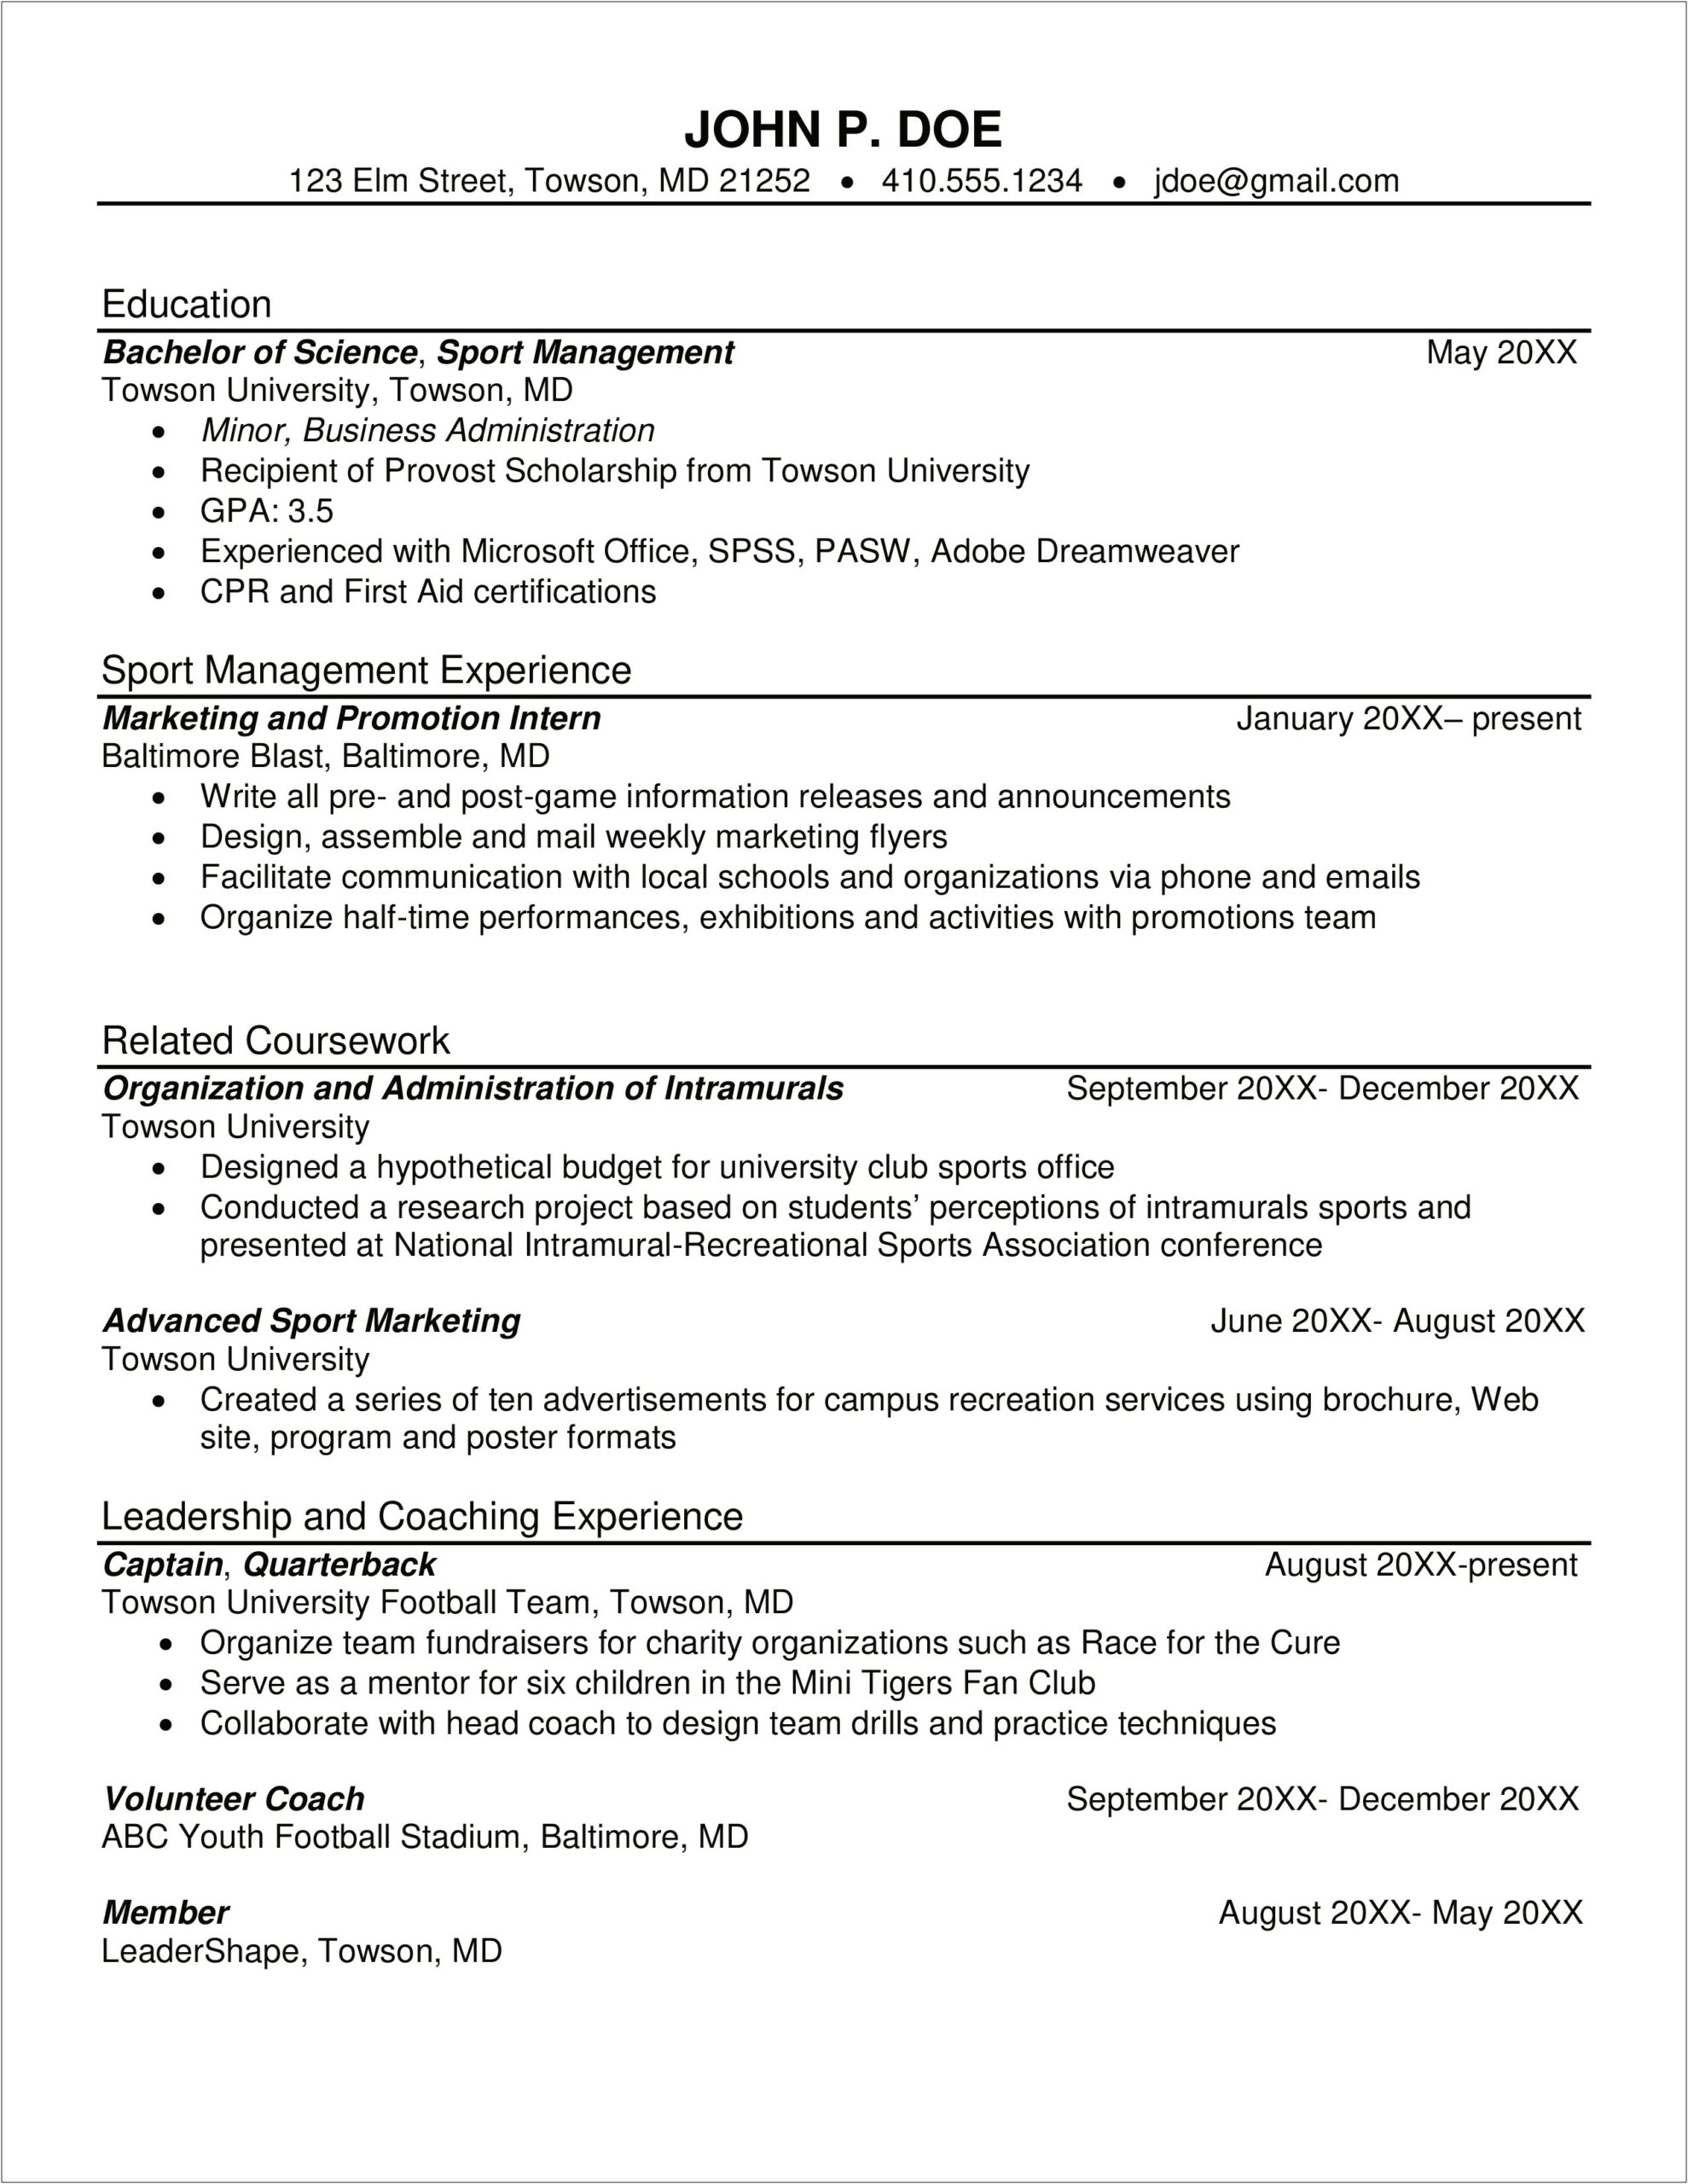 Sports Marketing Summary And Objective Section In Resume